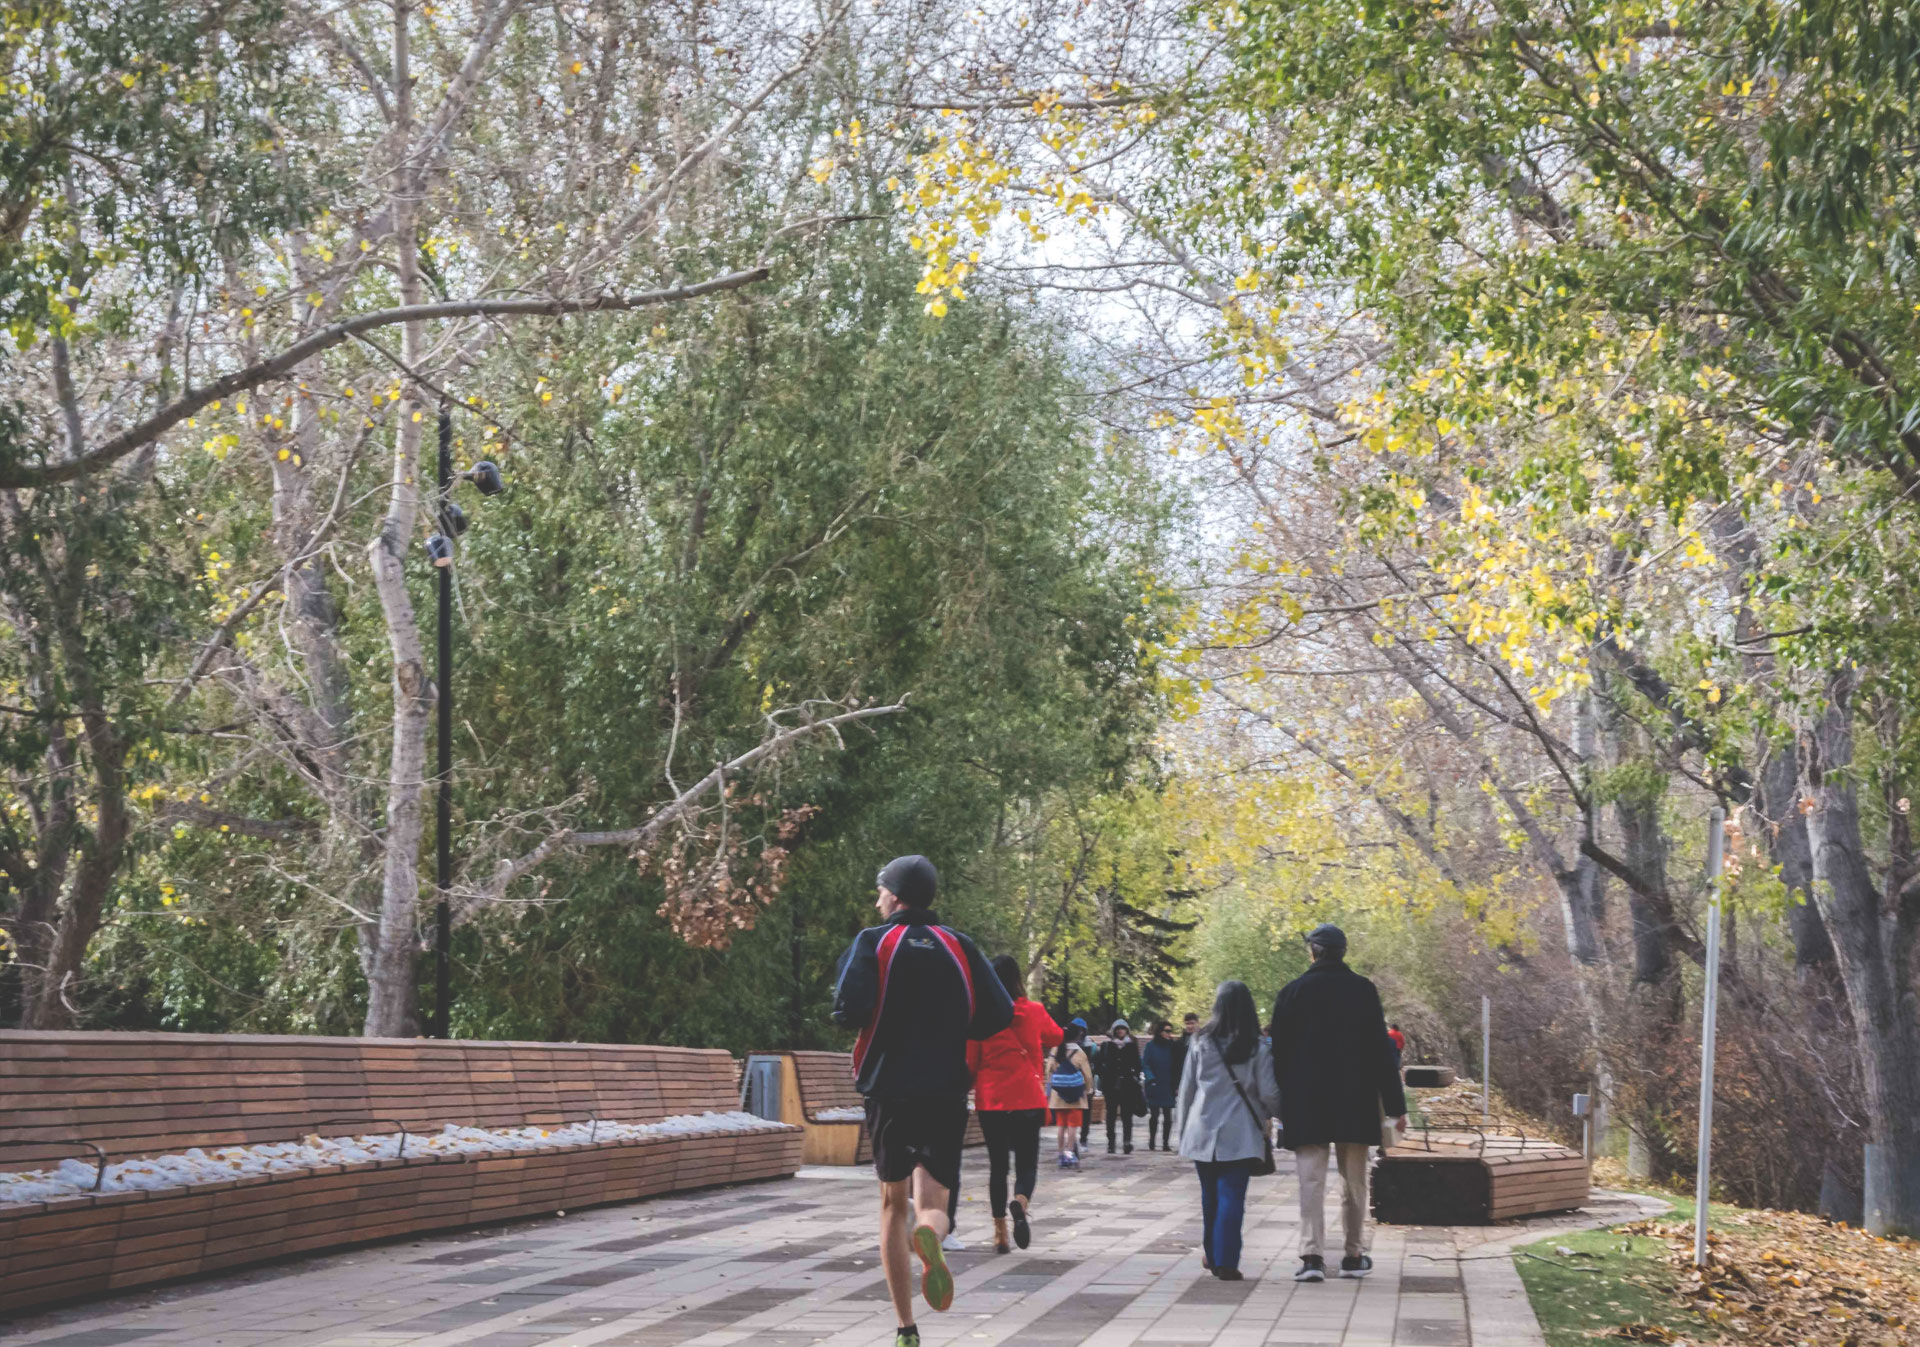 Start your walk along the Bow River Pathway downtown before heading out west to Edworthy Park